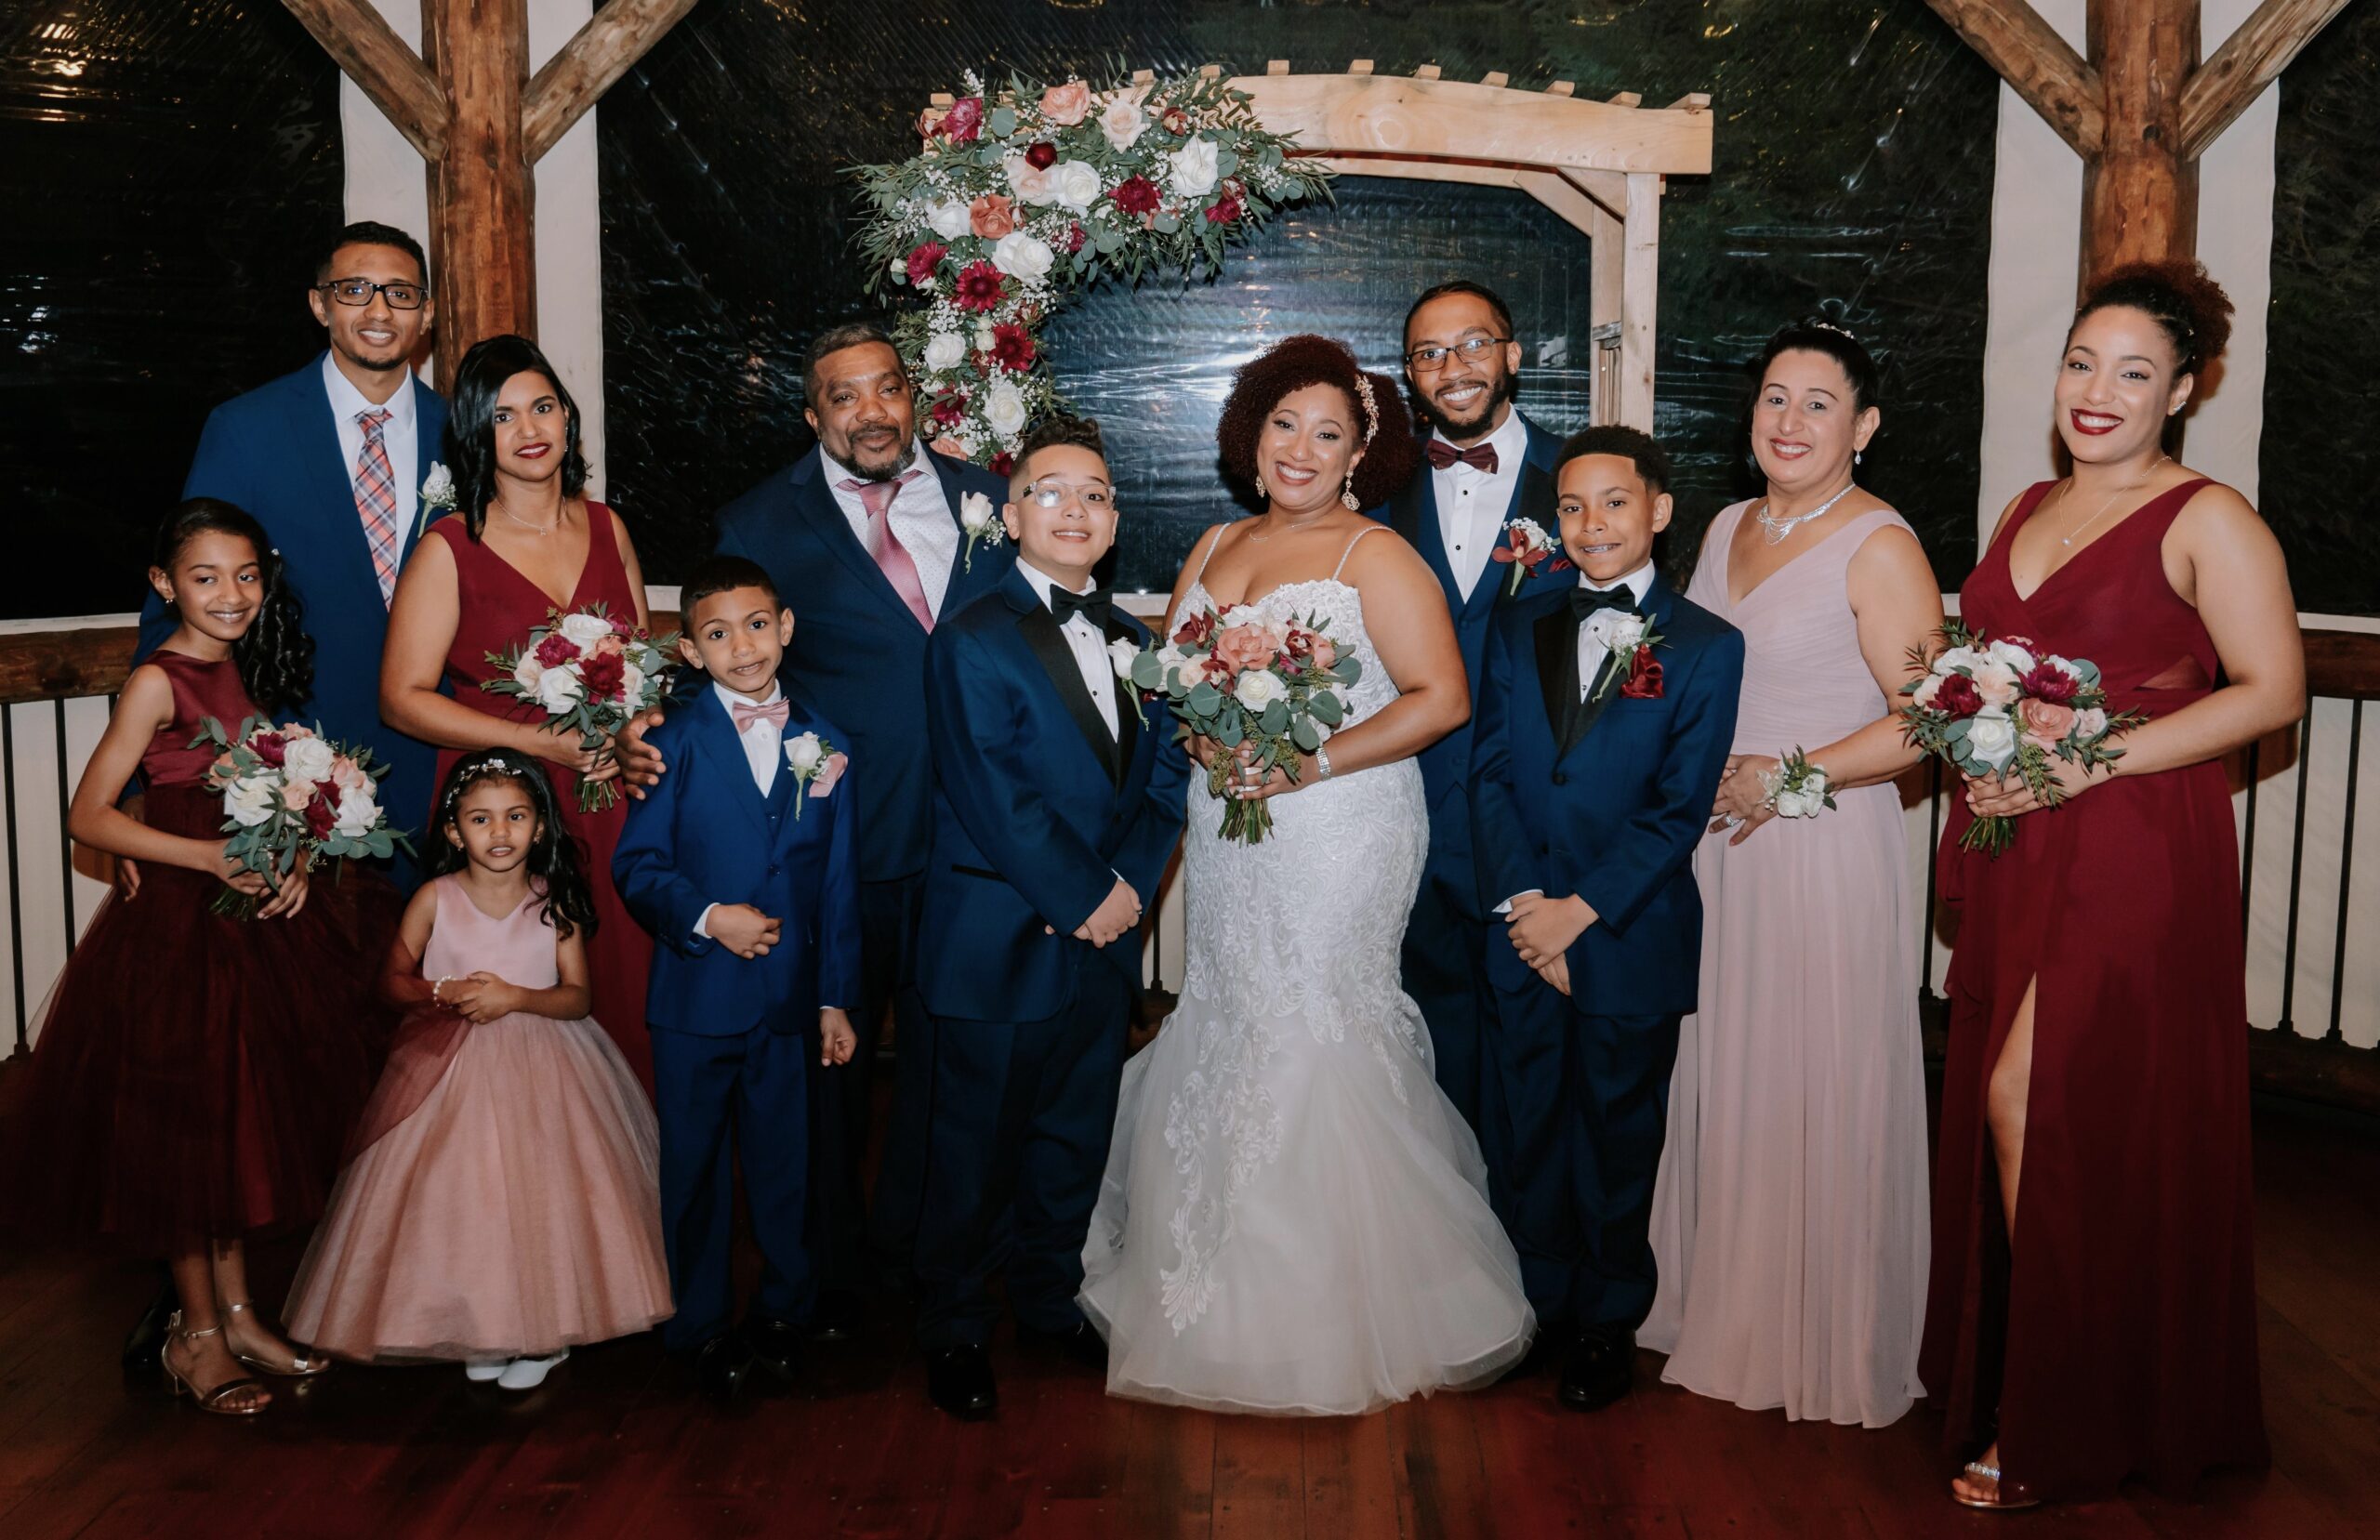 Anabelle and family - smiling in wedding attire